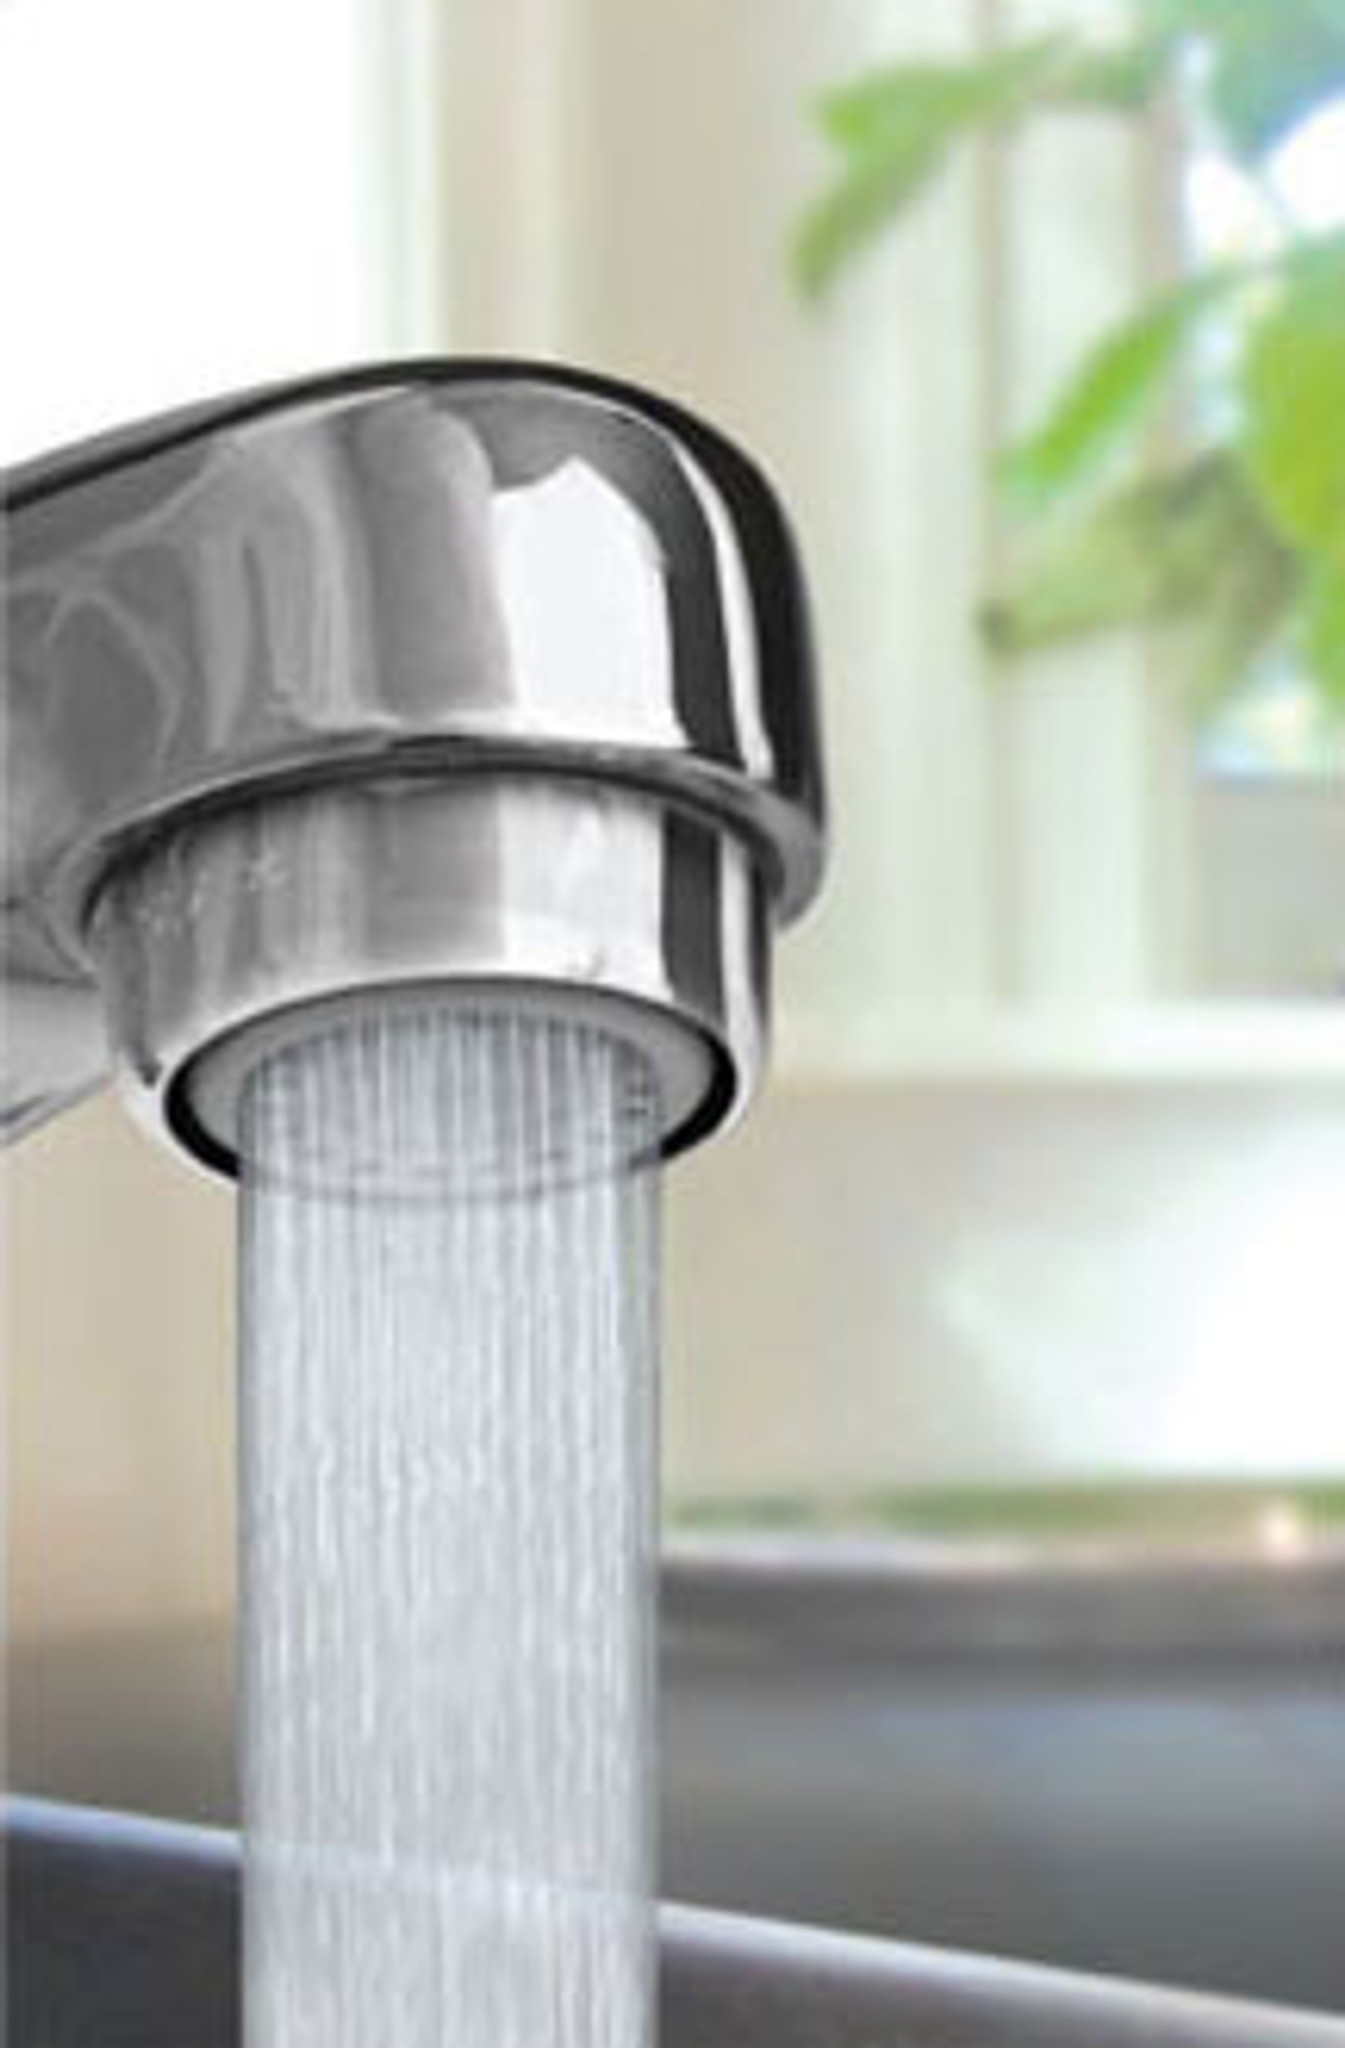 1 Gpm Faucet Aerator In Use  46520.1502809053 ?c=2